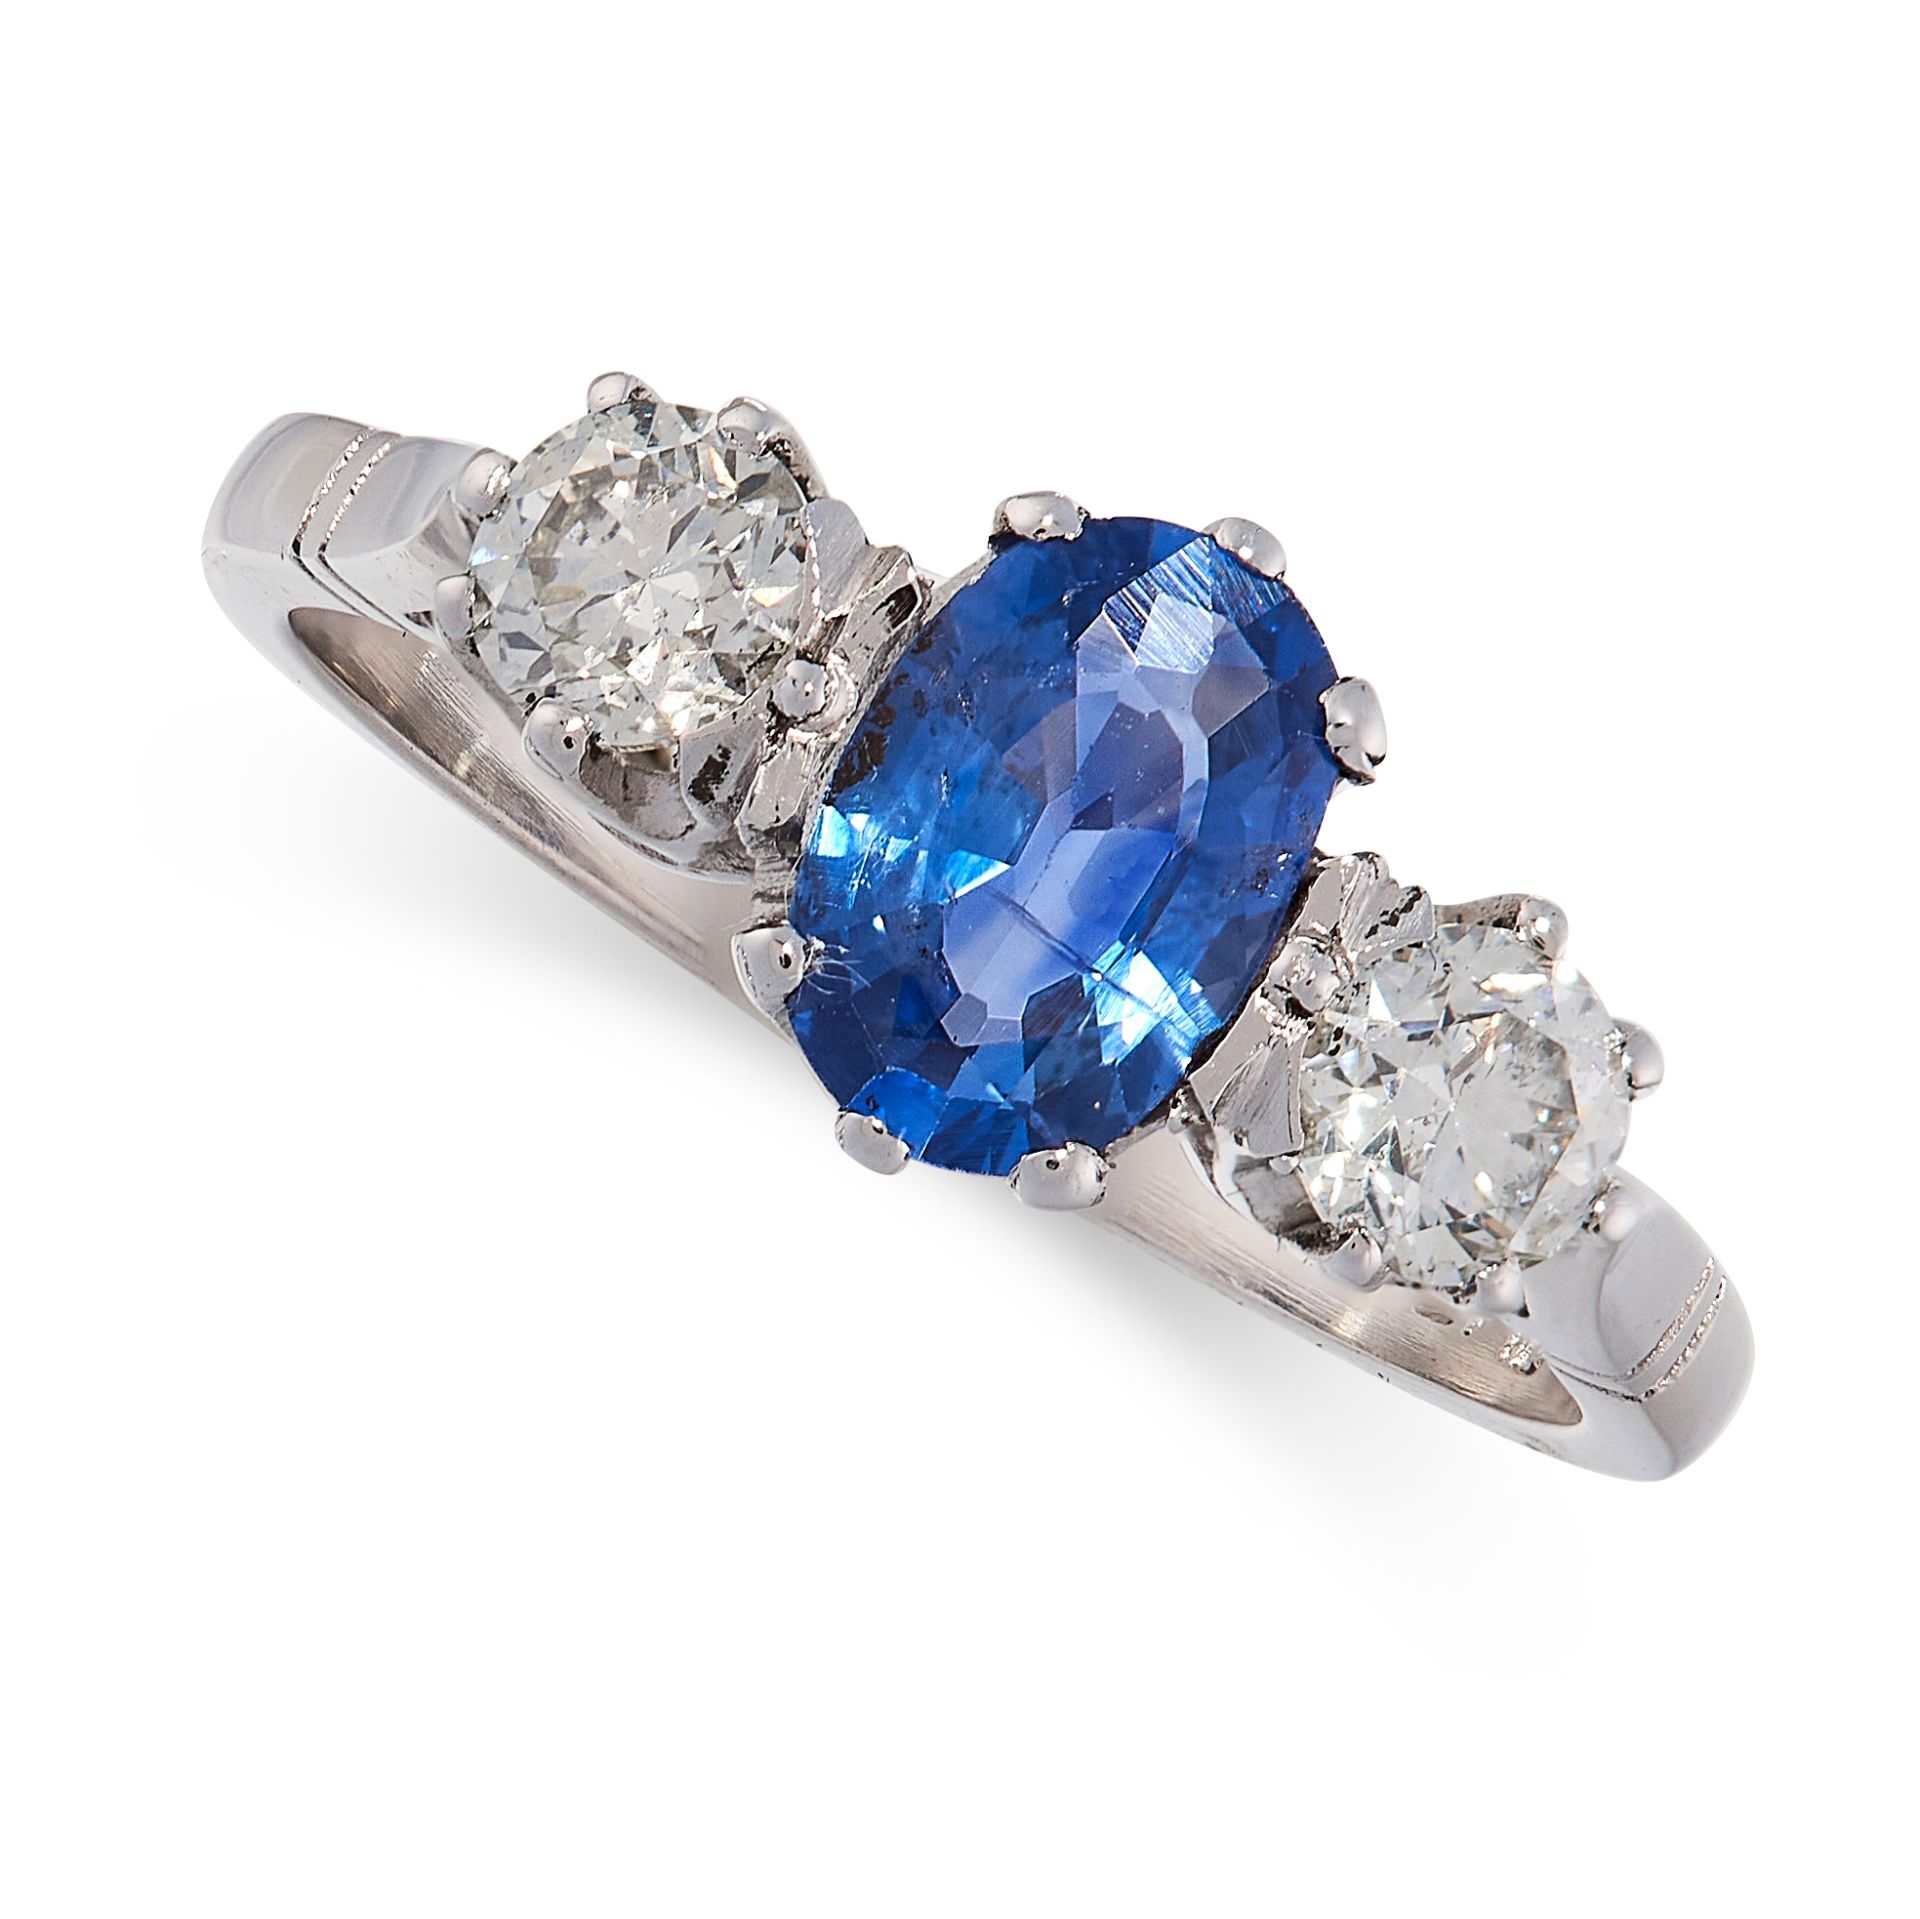 SAPPHIRE AND DIAMOND THREE STONE RING in platinum, set with an oval cut sapphire of 1.10 carats